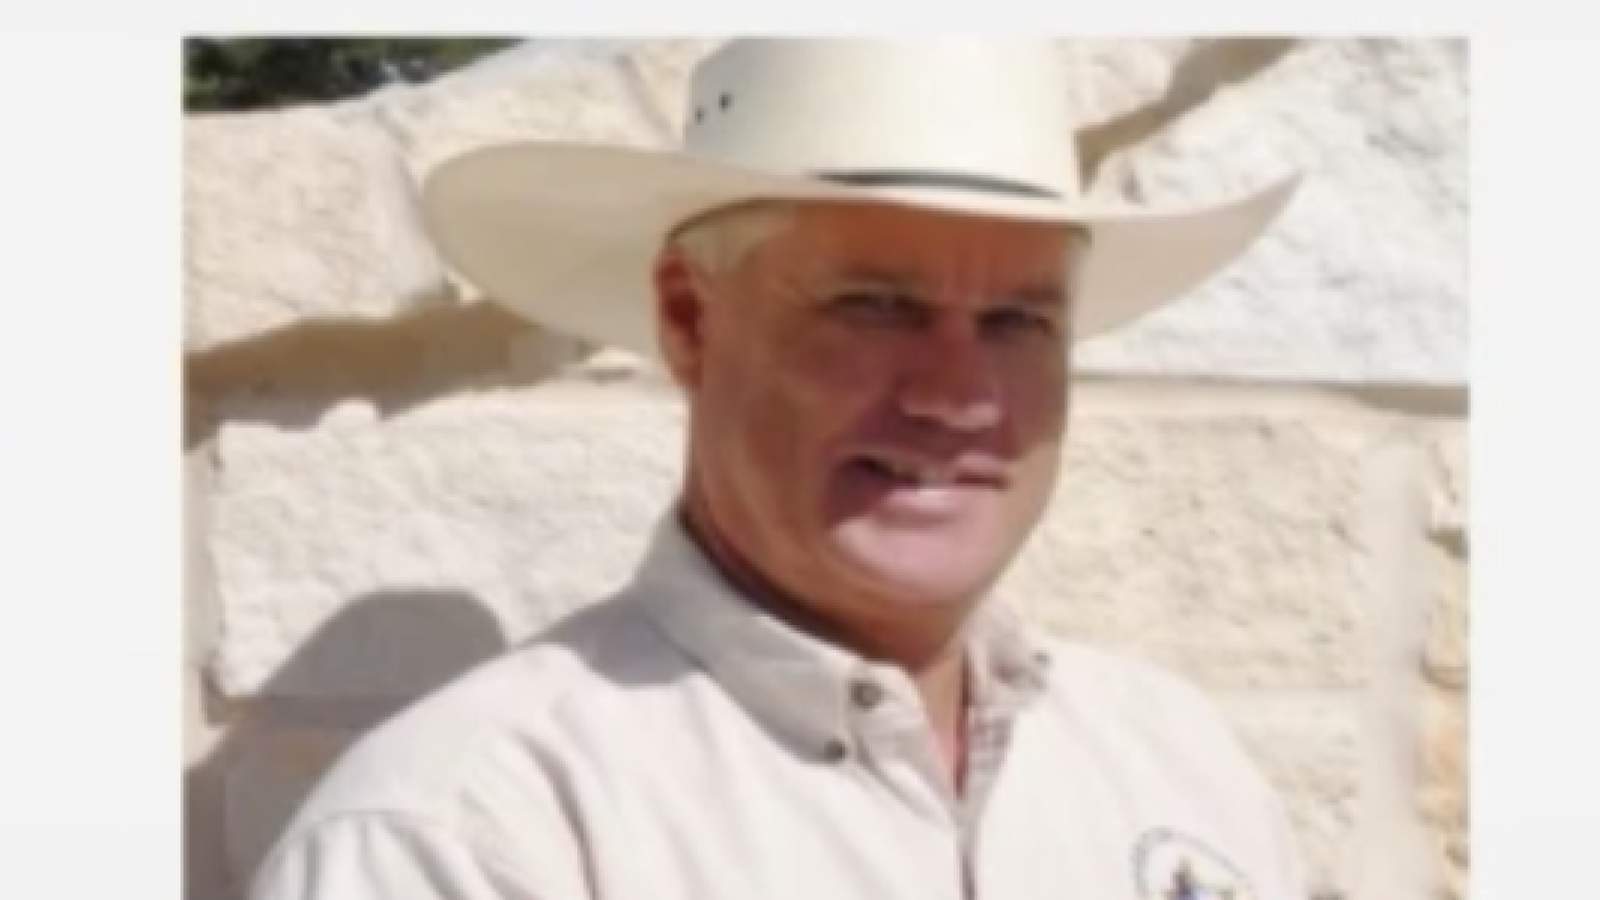 Former Wharton County Sheriff’s deputy takes own life amid investigation